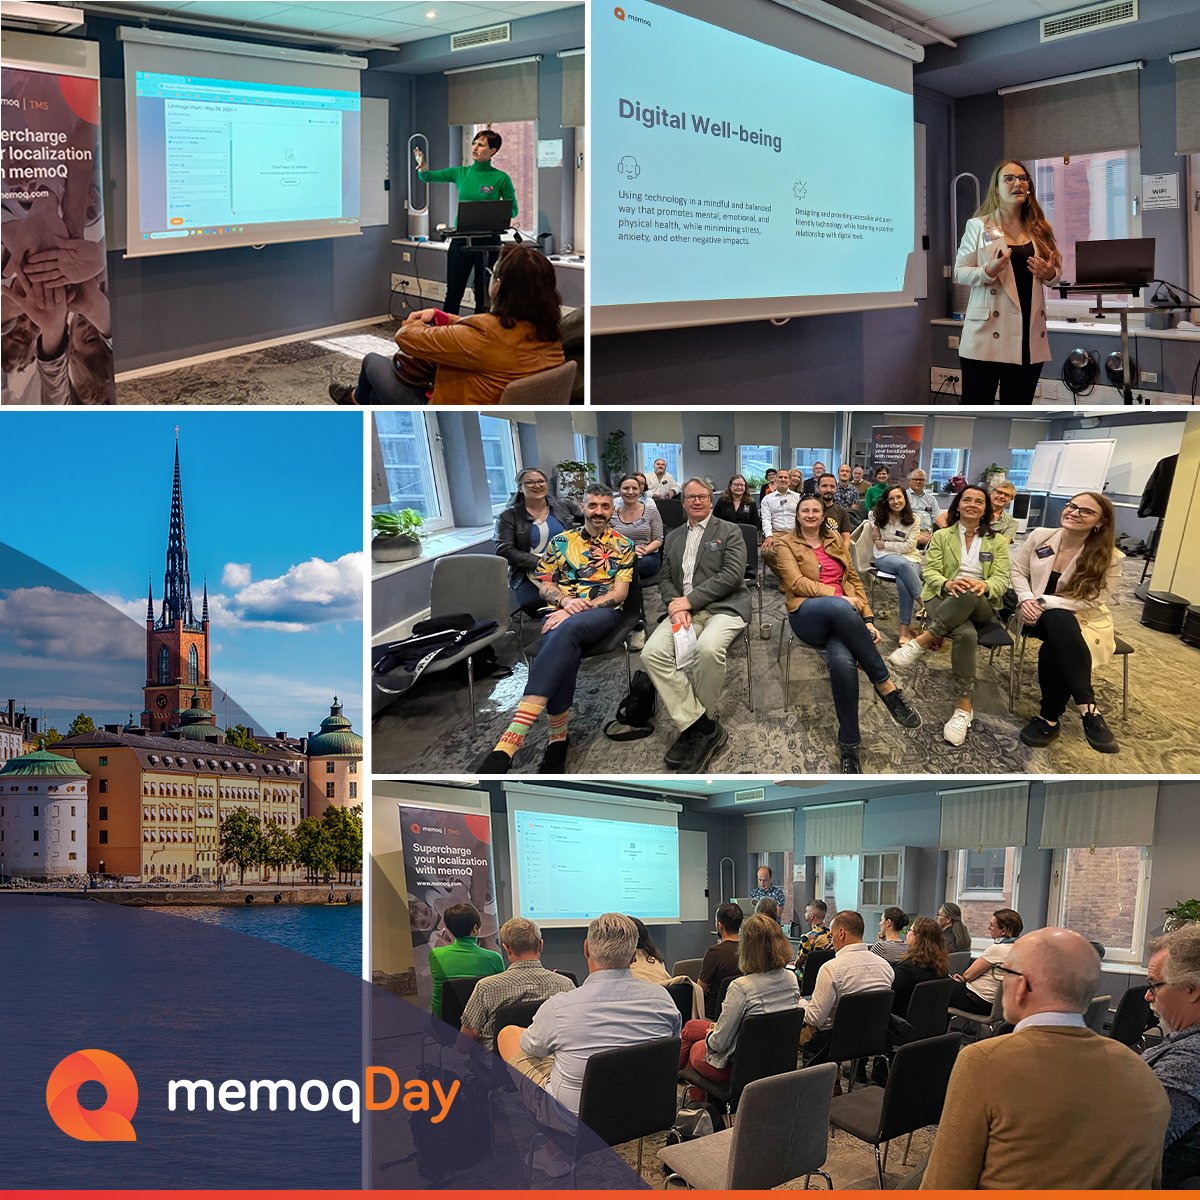 That’s a wrap on the 4th stop of our #memoQDay series this year. Thanks to our attendees for joining us in Sweden and engaging in the conversations. Special thanks to our team members as well as to Anne Marie Colliander Lind for her expertise in helping us organize this edition!